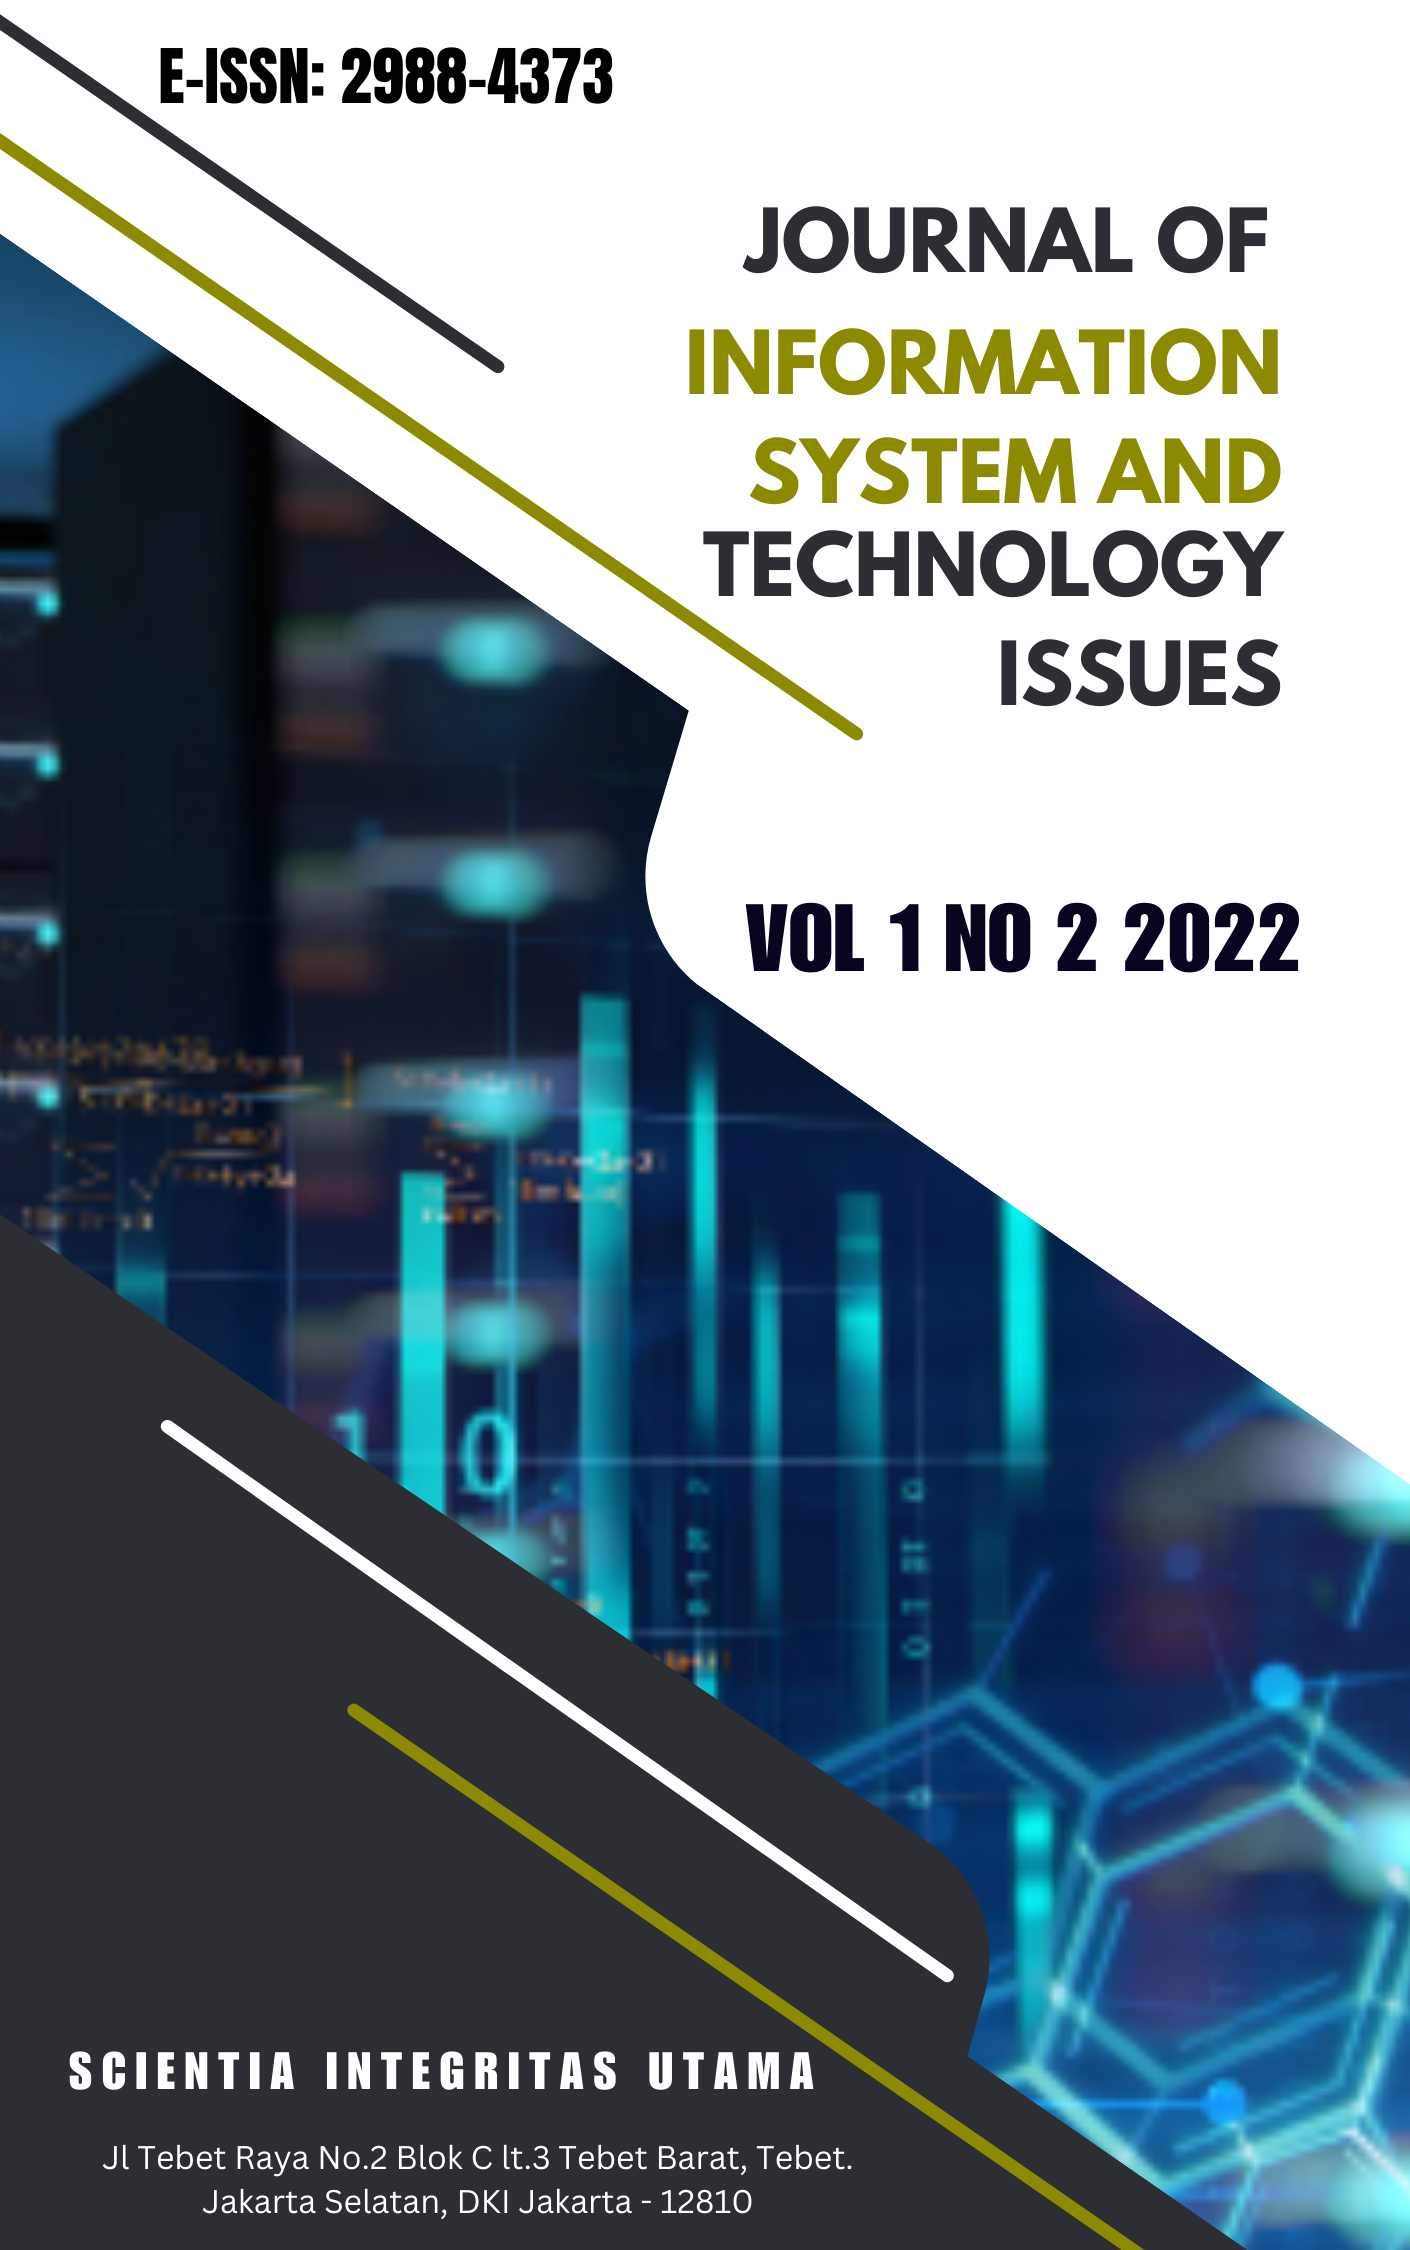 					View Vol. 1 No. 2 (2022): Journal of Information System and Technology Issues
				